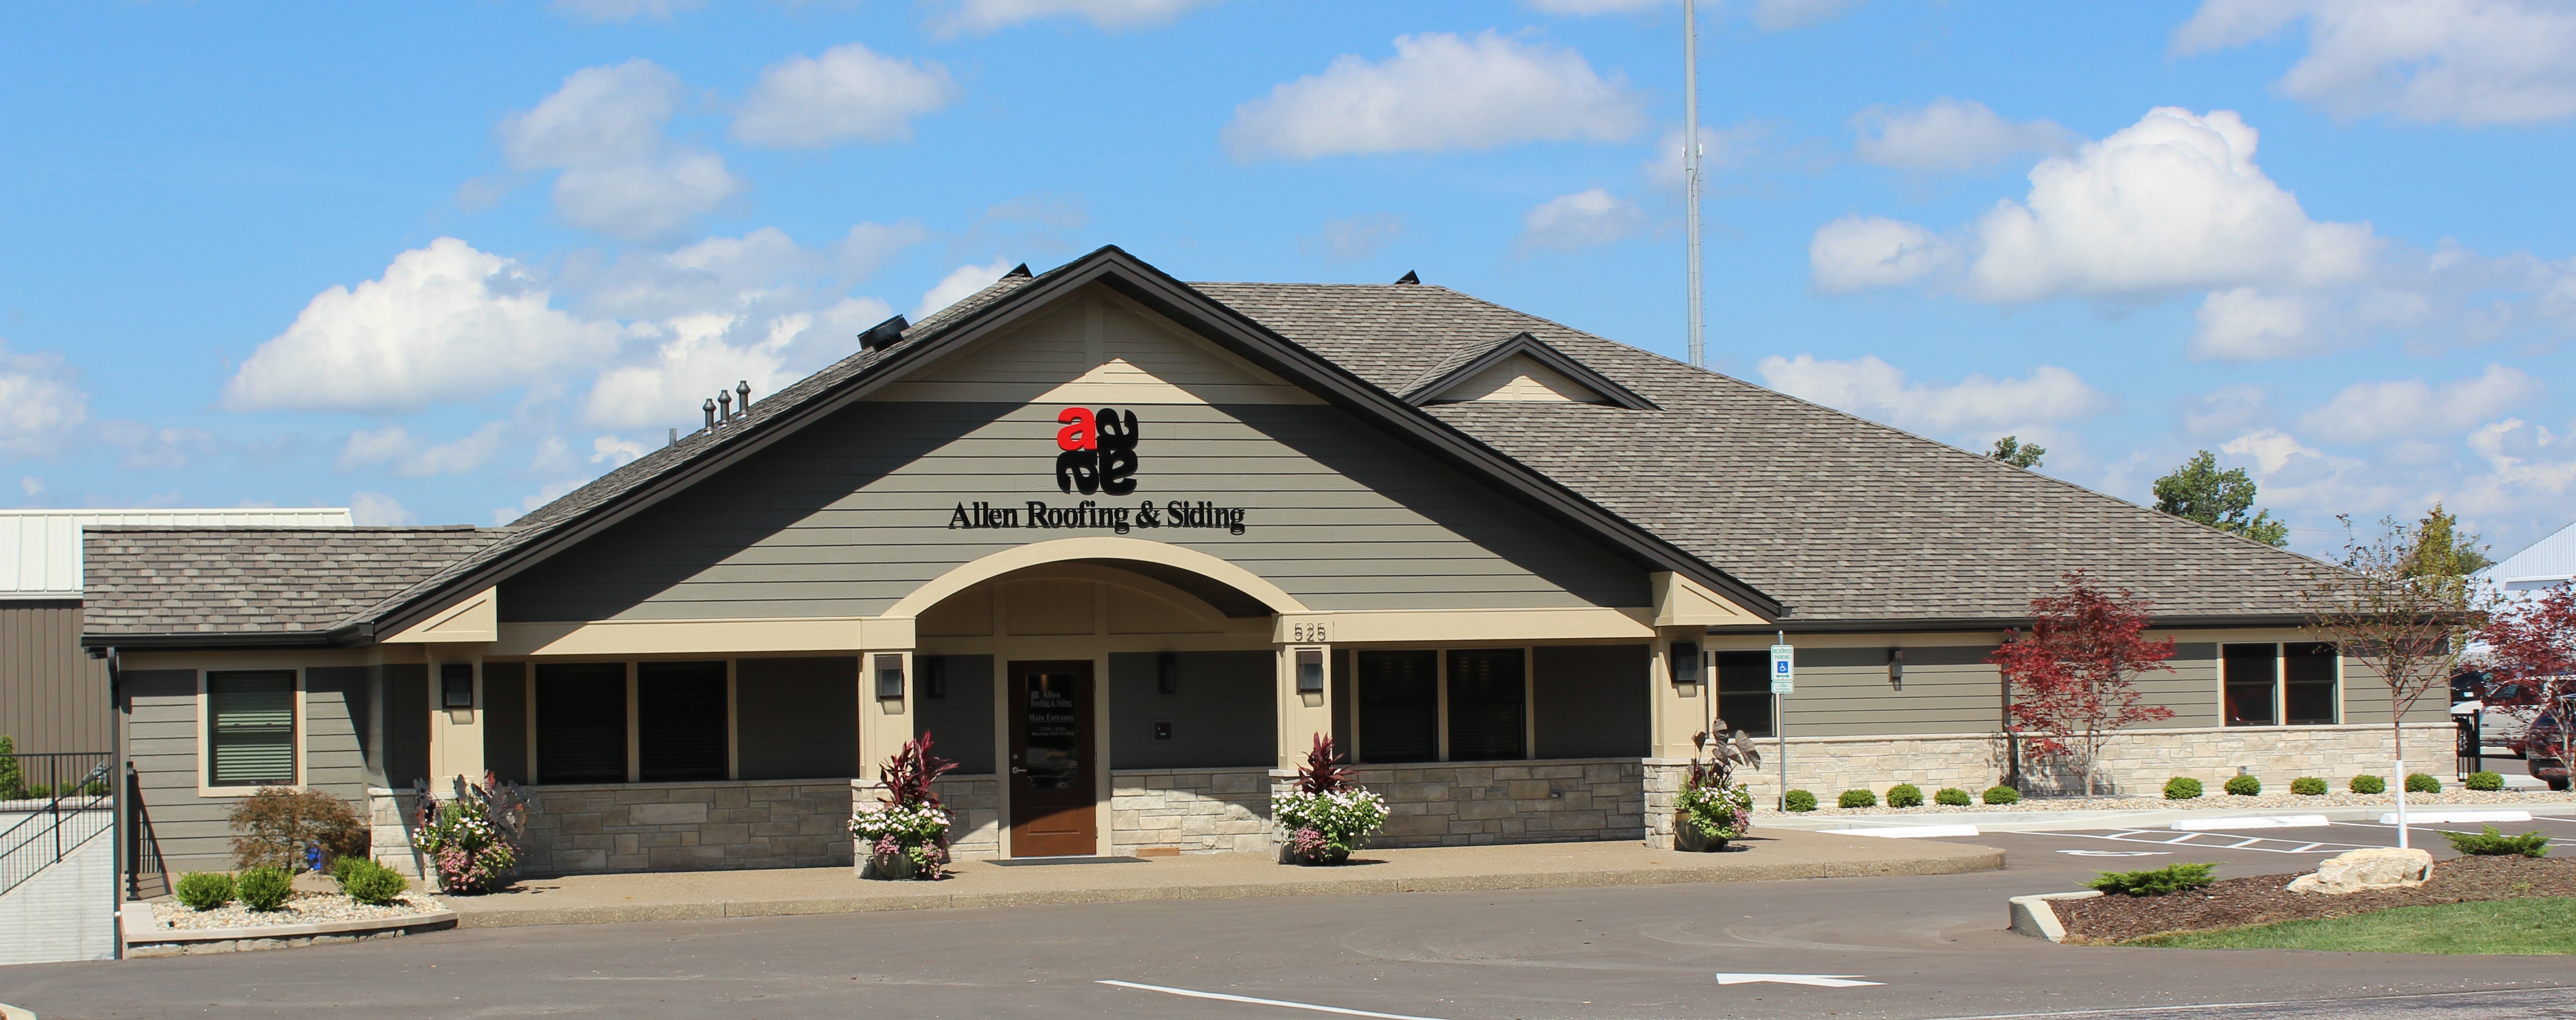 Allen Roofing & Siding Photo